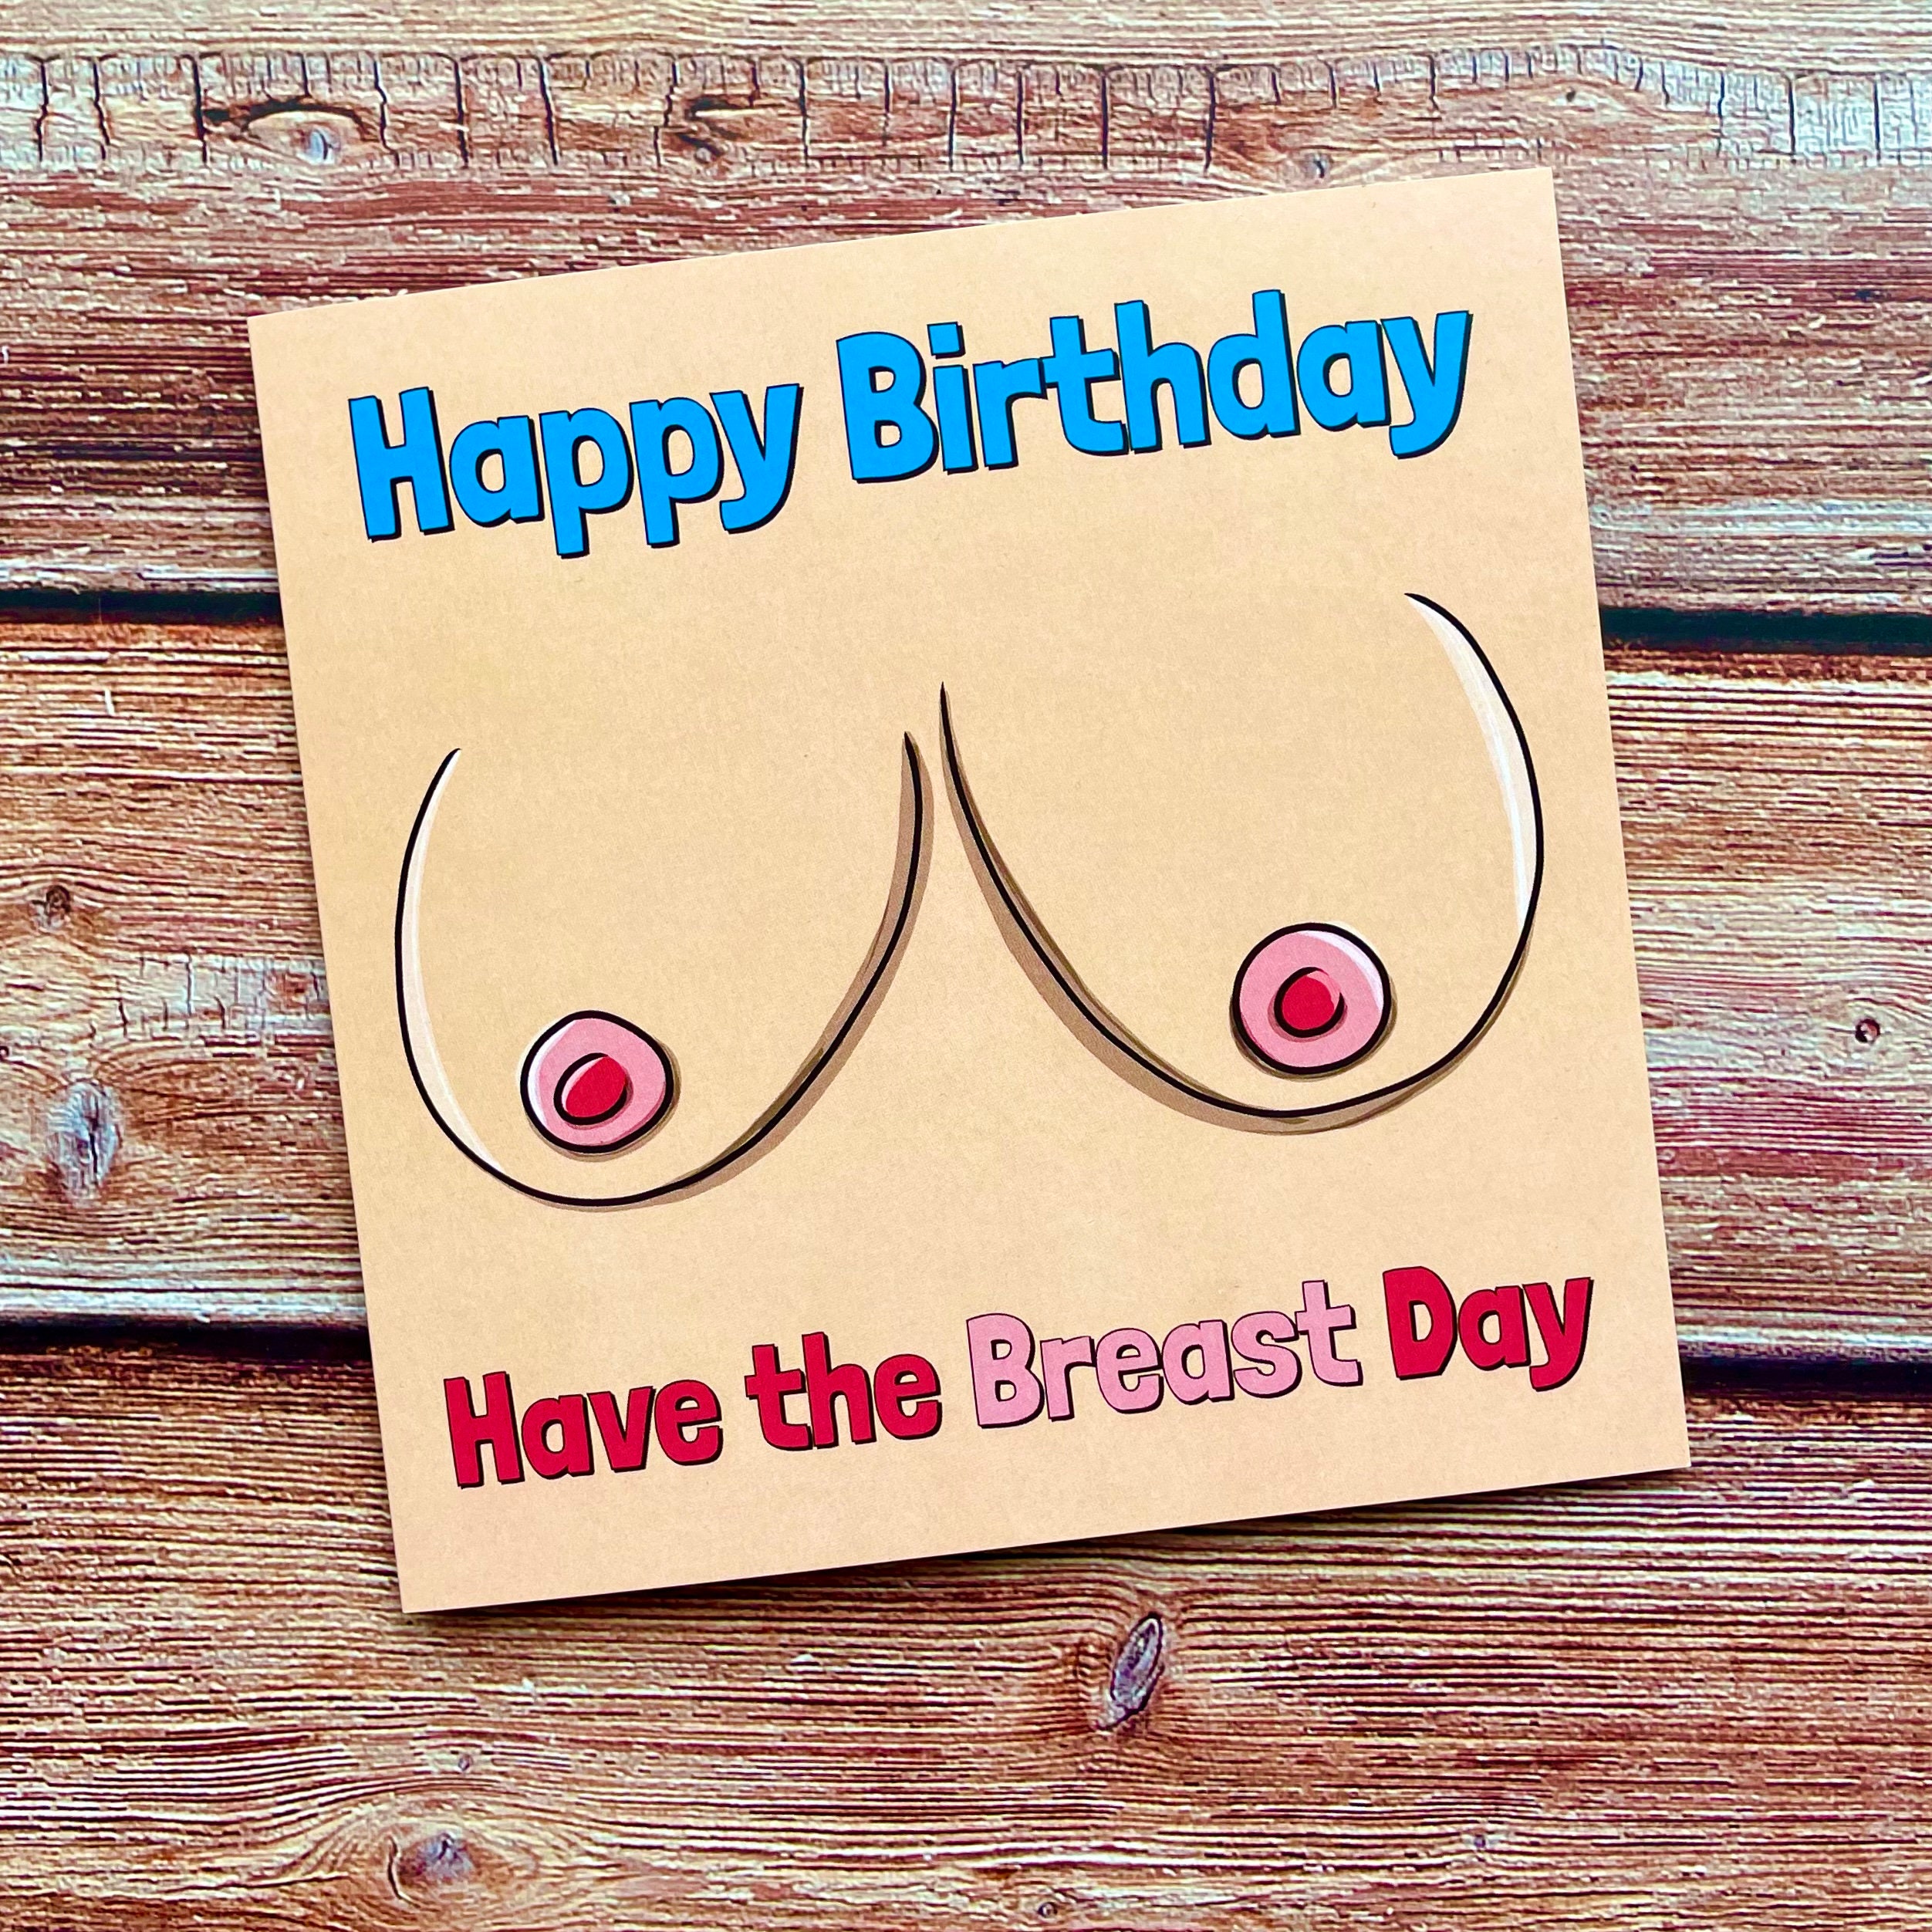 doug arendell recommends big boobs happy birthday pic